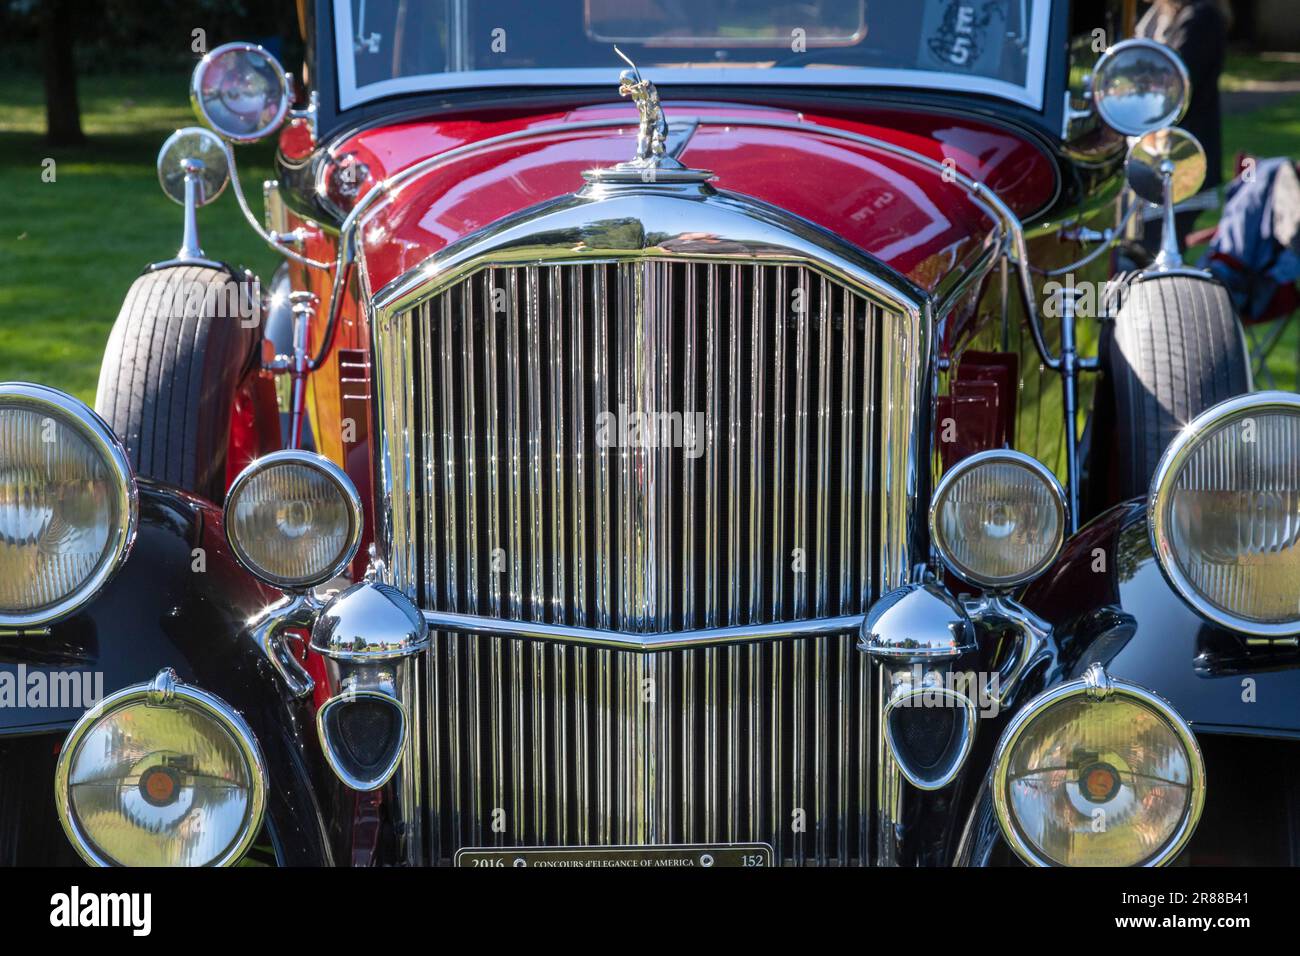 Grosse Pointe Shores, Michigan, The 1932 Pierce Arrow Model 54 Sport Phaeton at the Eyes on Design auto show. This year's show featured primarily Stock Photo